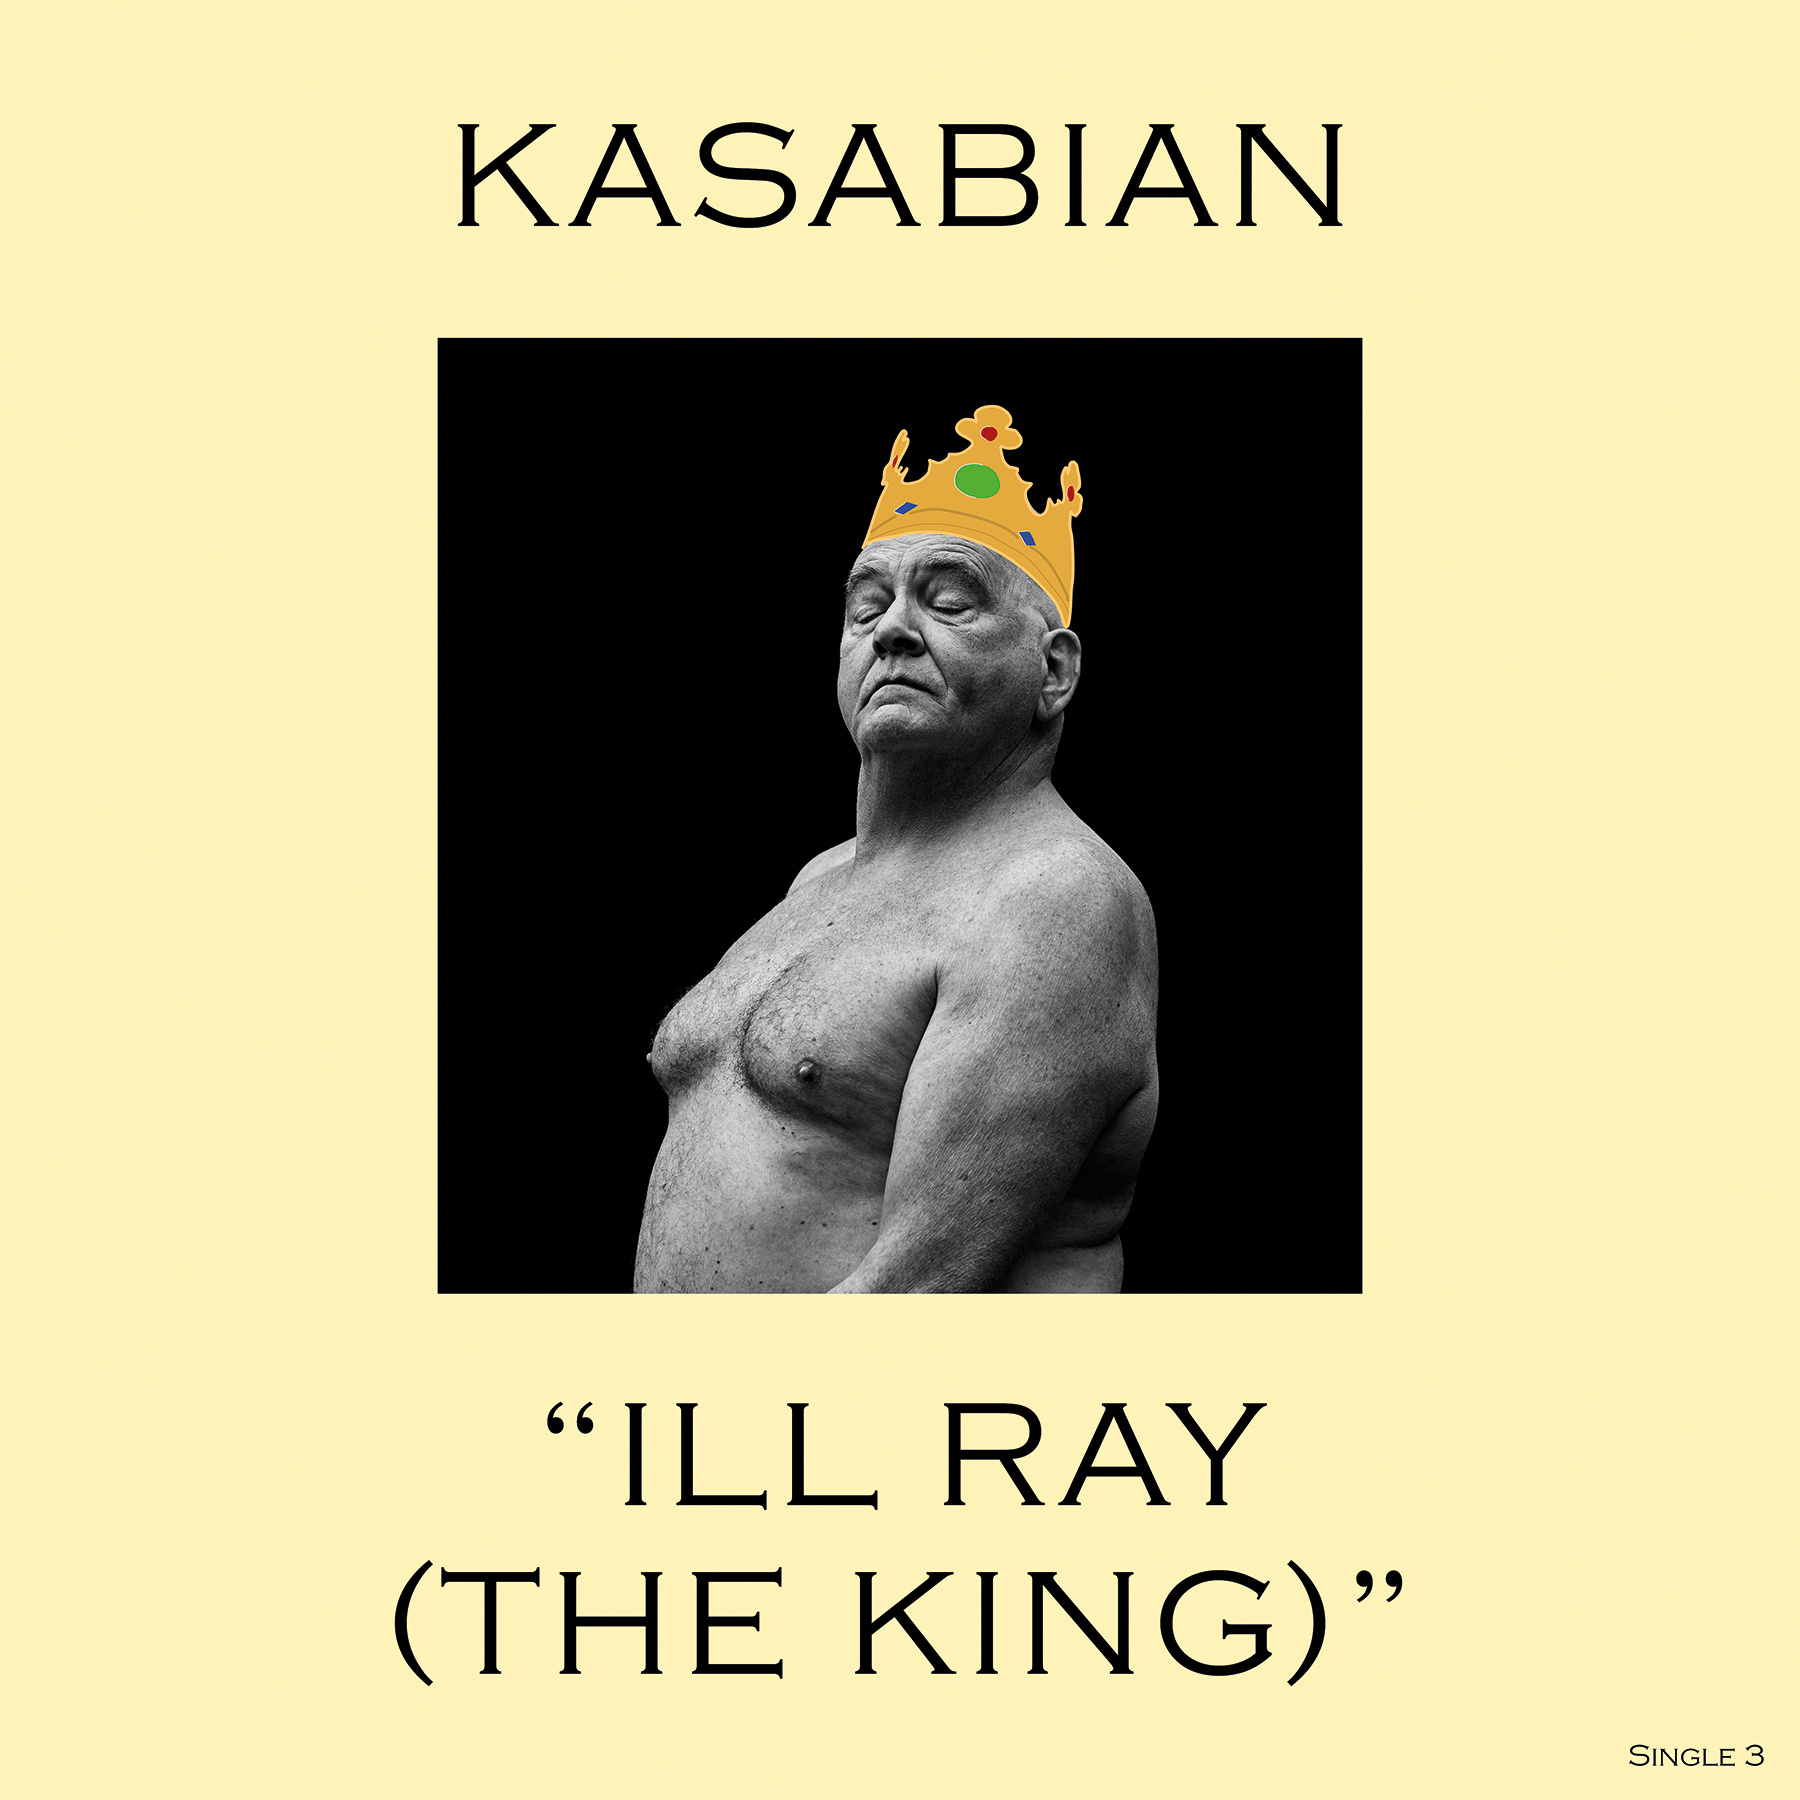 neil_bedford_aitor_throup_kasabian_album_artwork_for_crying_out_loud_sony_records_ill_ray